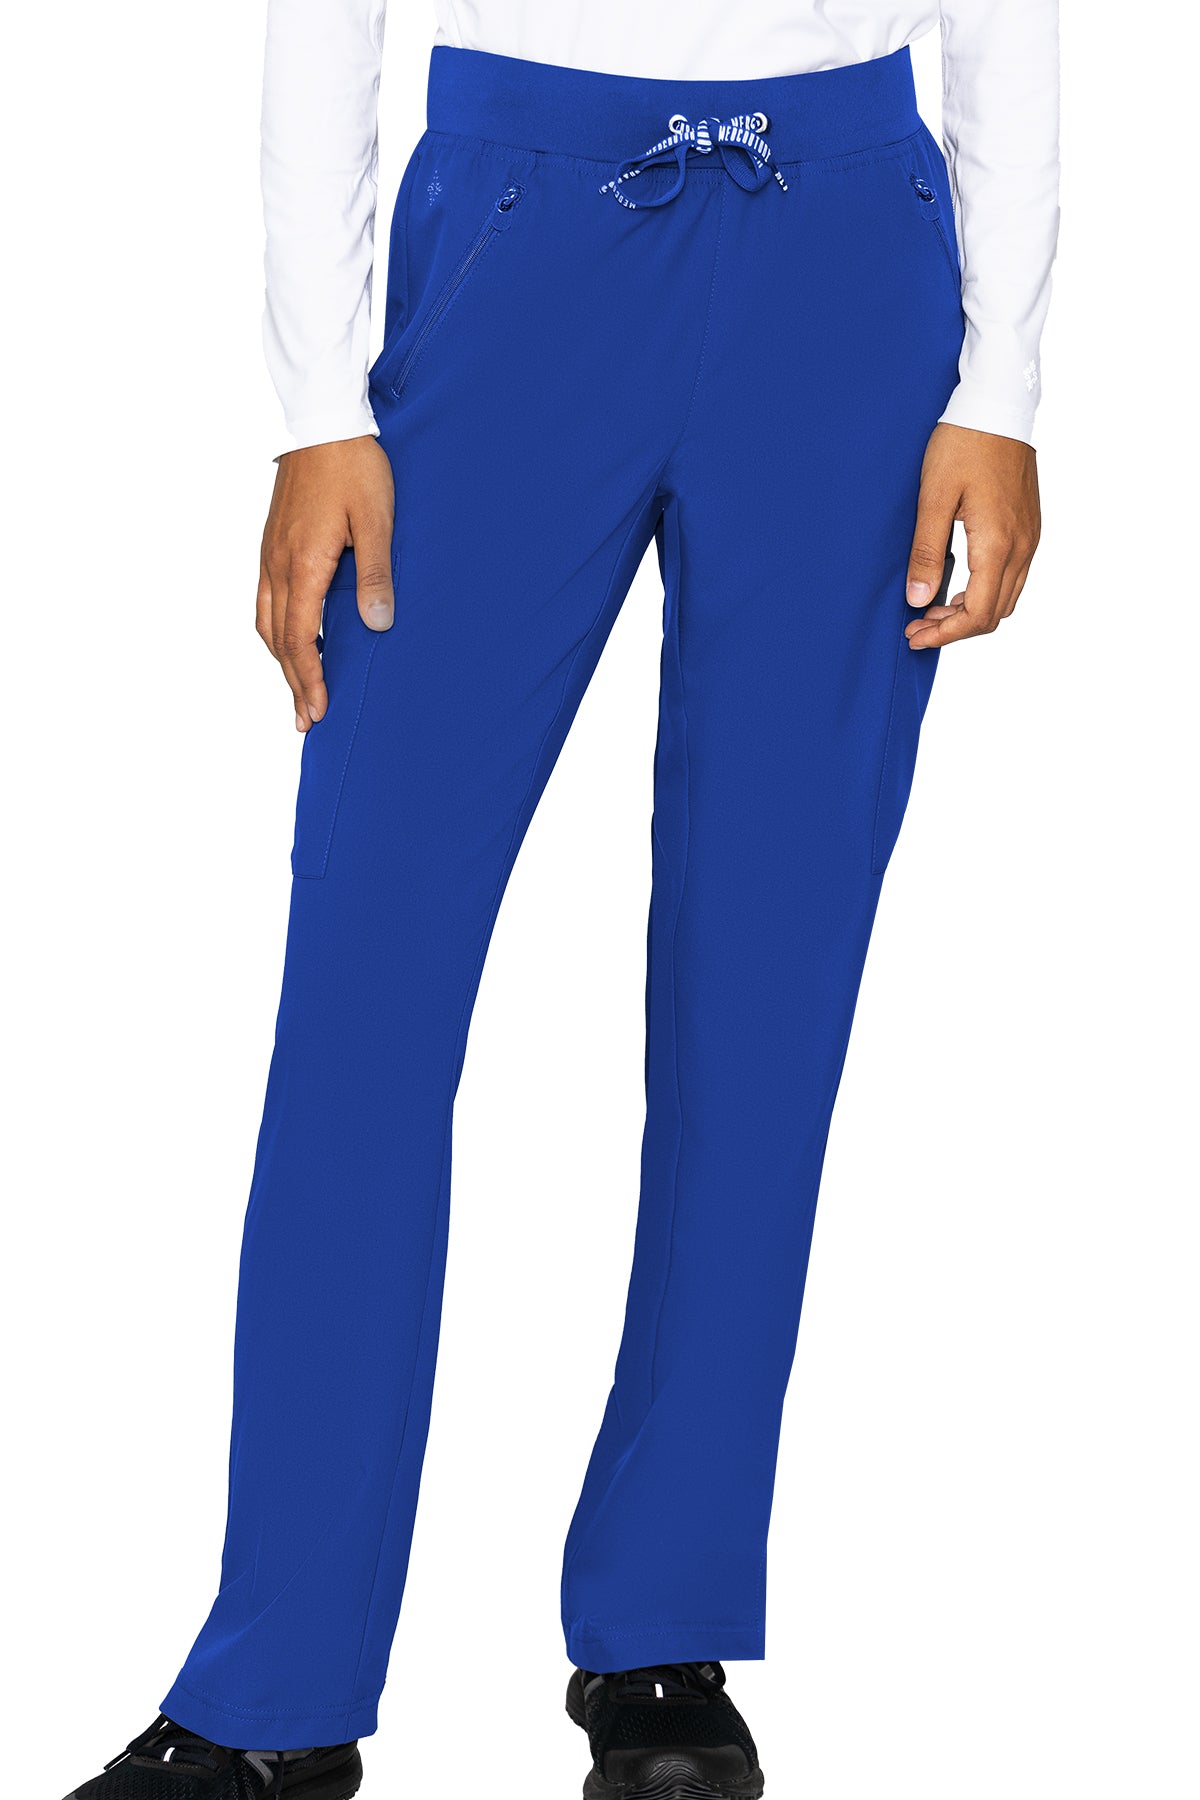 Med Couture 2702 Insight Women's Zipper Pocket Pant - TALL royal front 